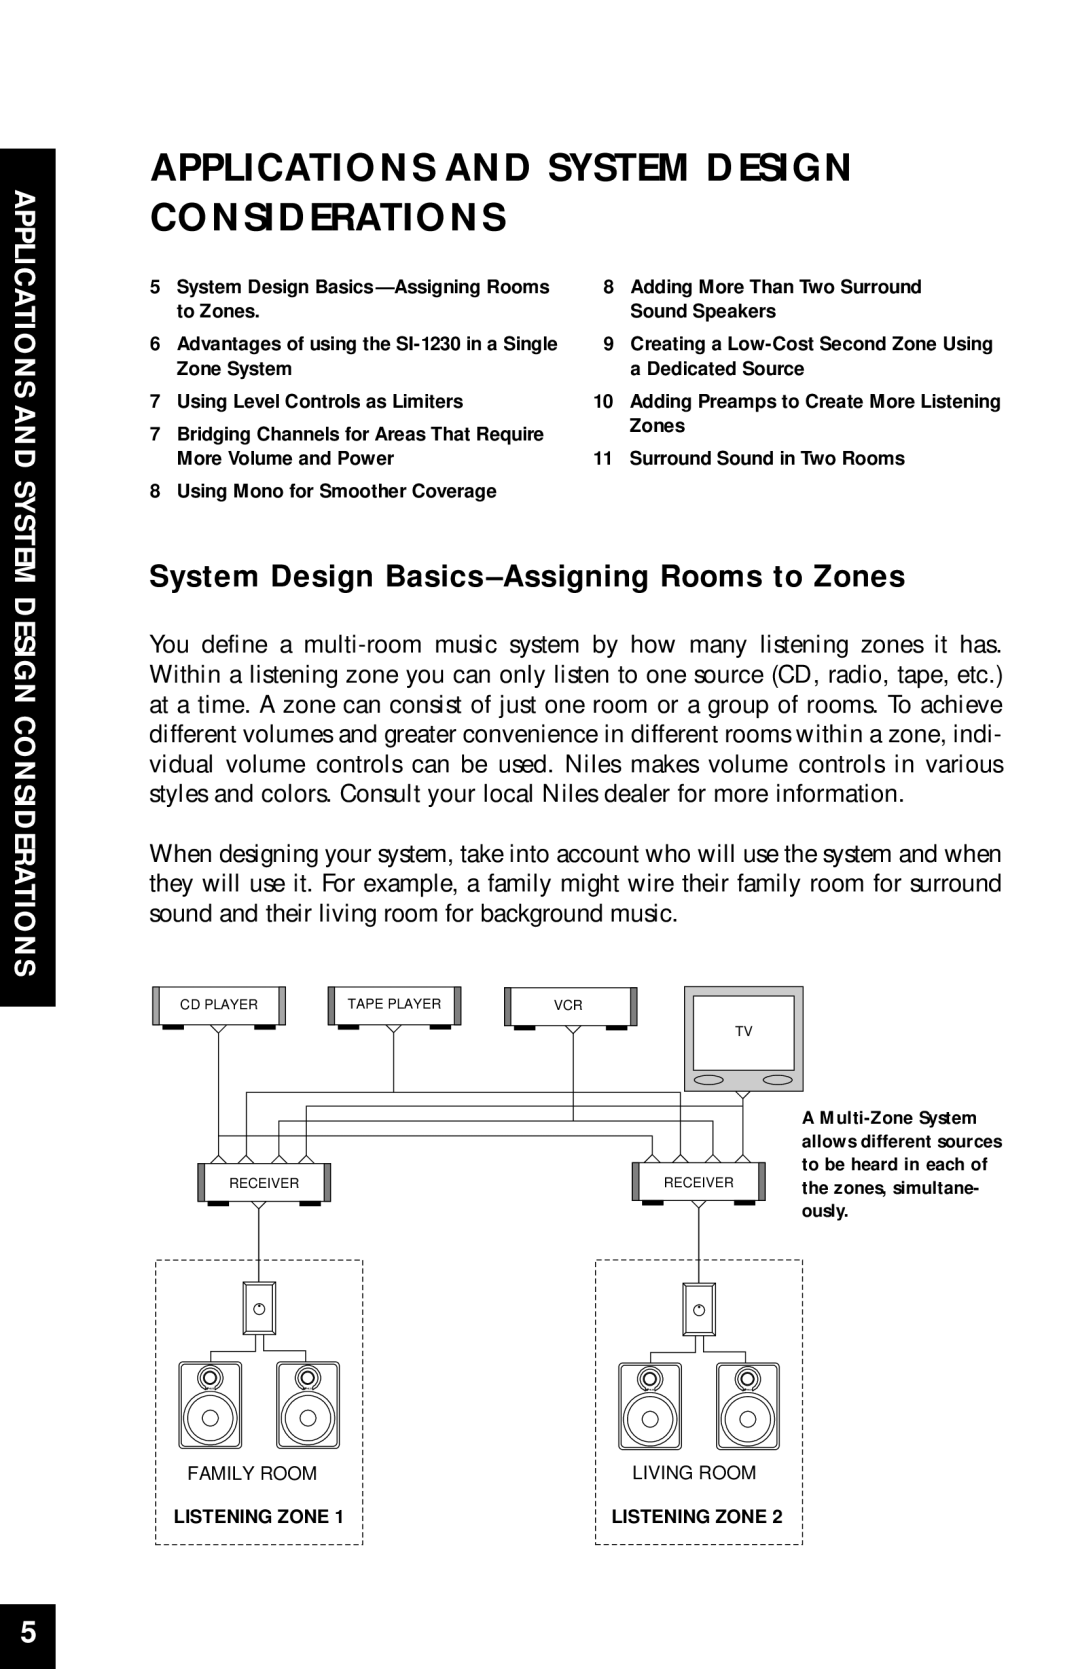 Niles Audio SI-1230 manual Applications And System Design Considerations, System Design Basics–AssigningRooms to Zones 